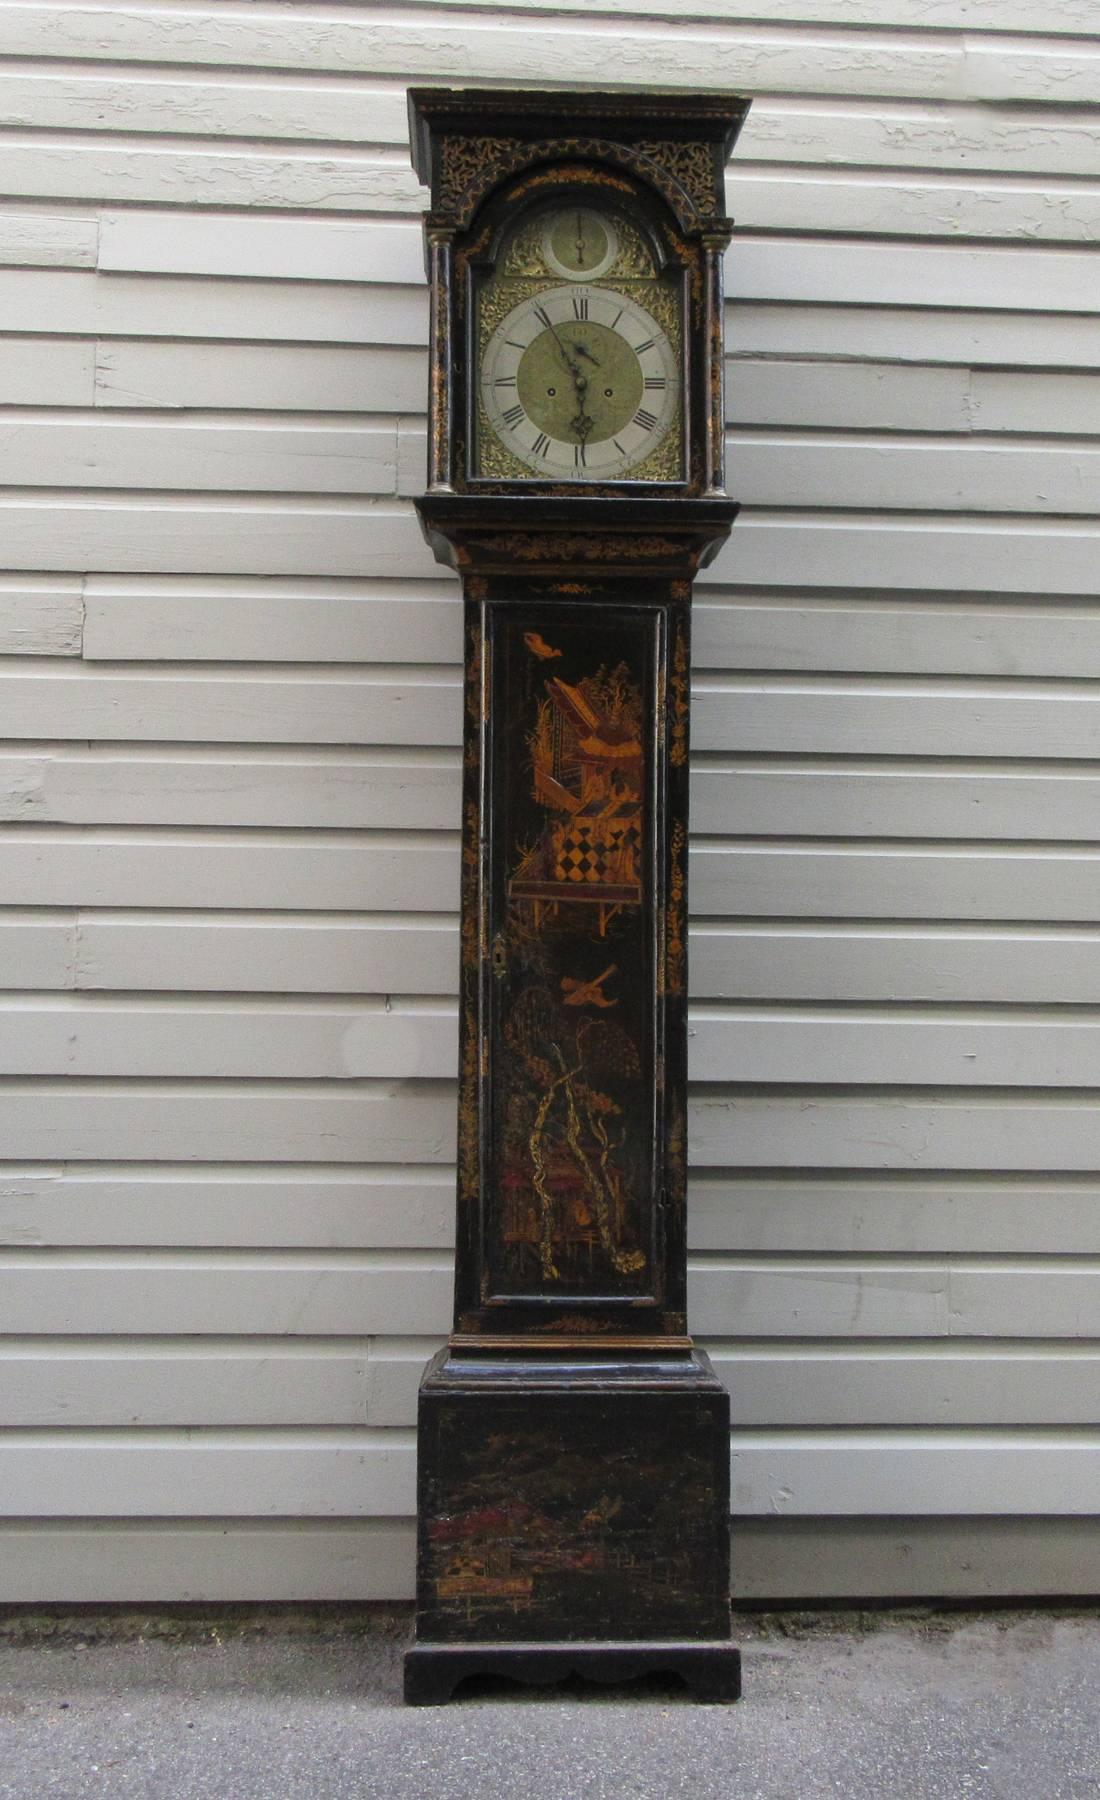 A 18th century English Queen Anne chinoiserie tall case clock, circa 1760, signed by Edward Appleford of Dunftable, an English brazier of the period. The clock keeps consistent time and chimes on the hour.